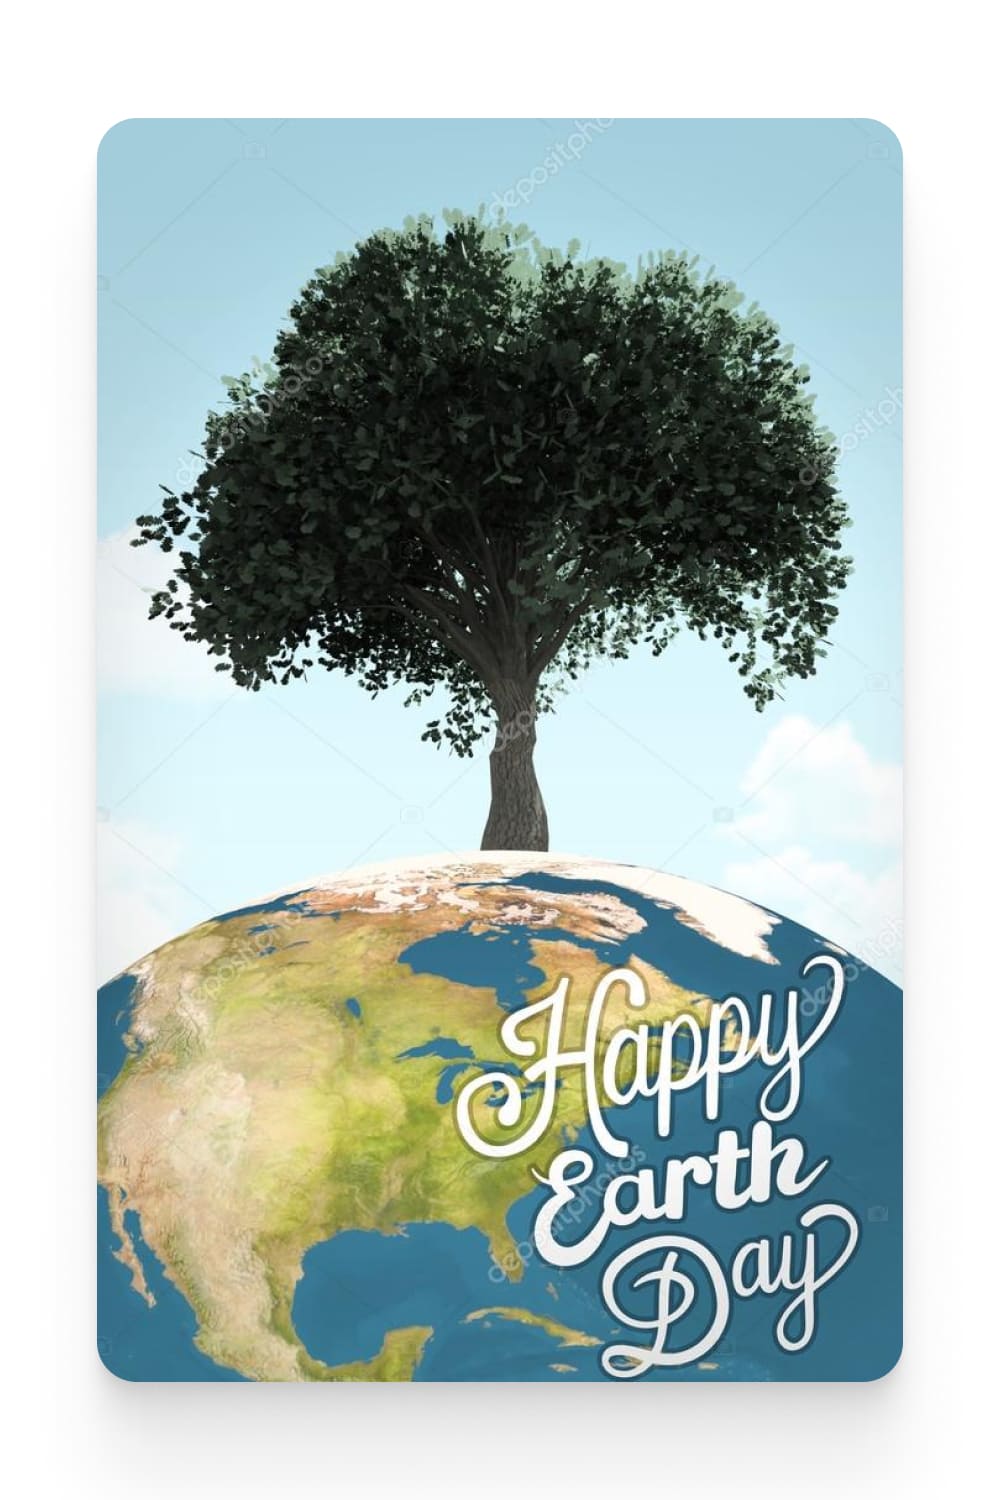 Composite image of happy earth day with tree and planet.